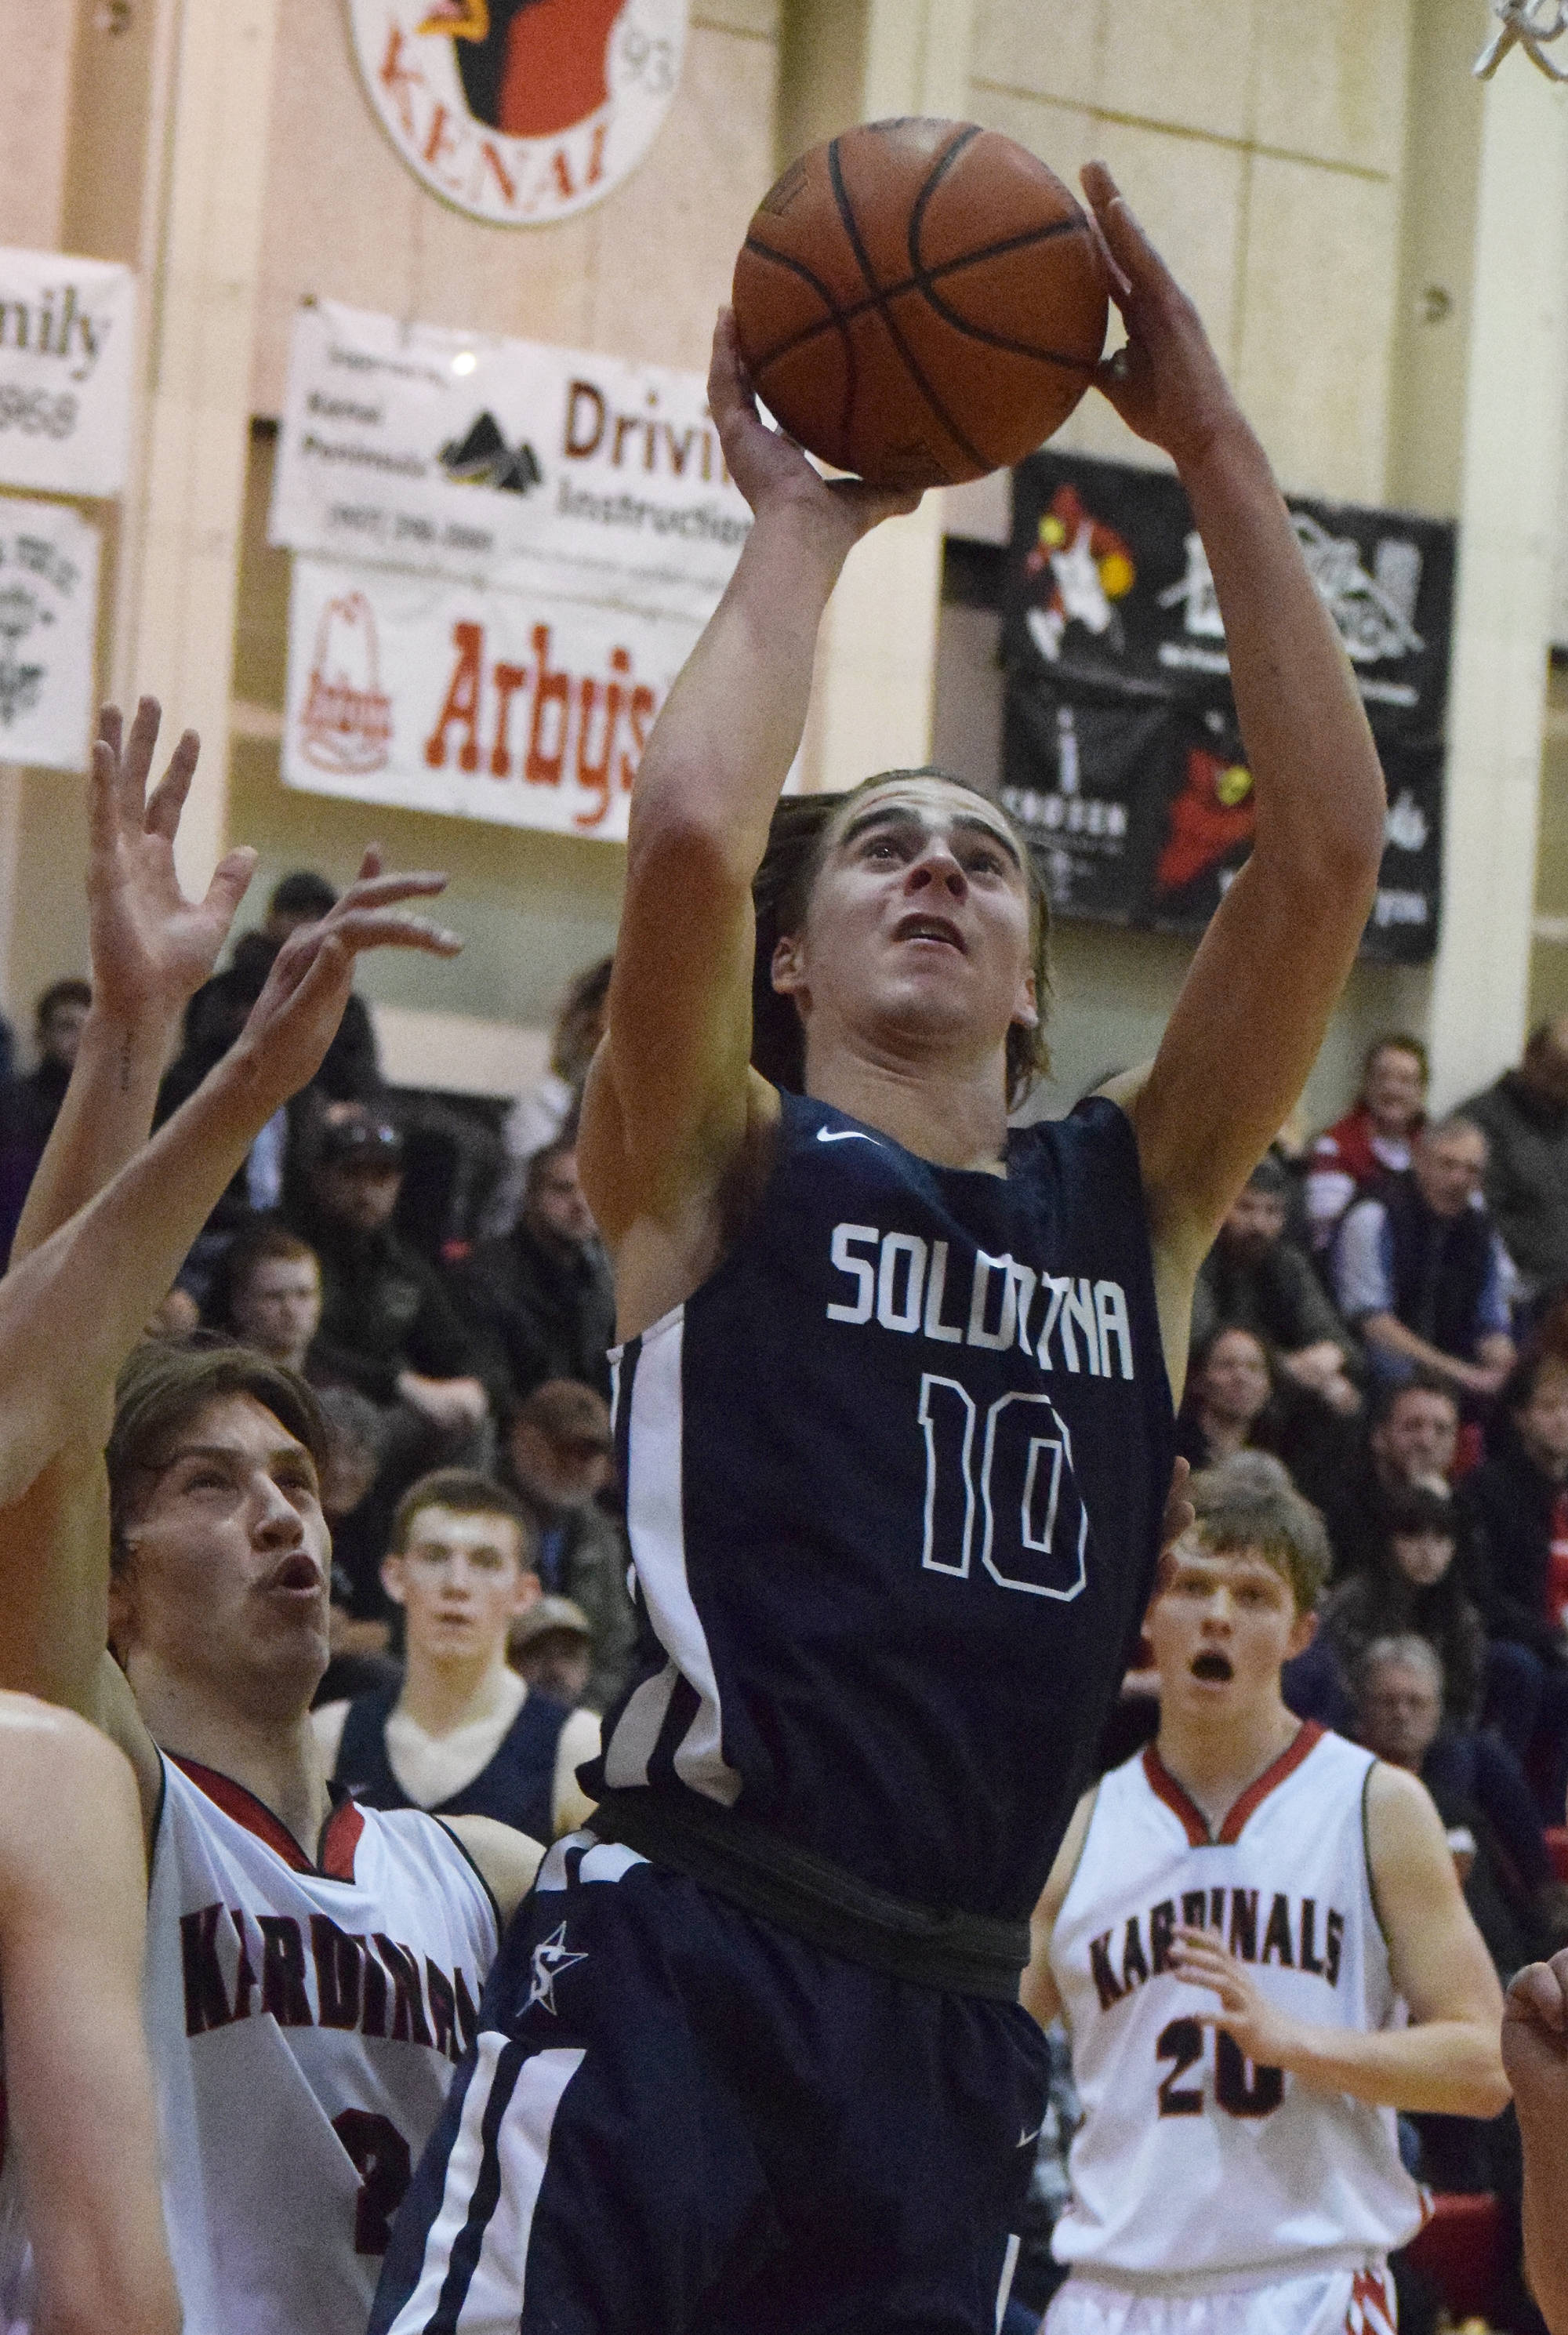 Soldotna’s Zach Hanson (10) takes a shot Saturday against Kenai Central in a nonconference clash at Kenai Central High School. (Photo by Joey Klecka/Peninsula Clarion)